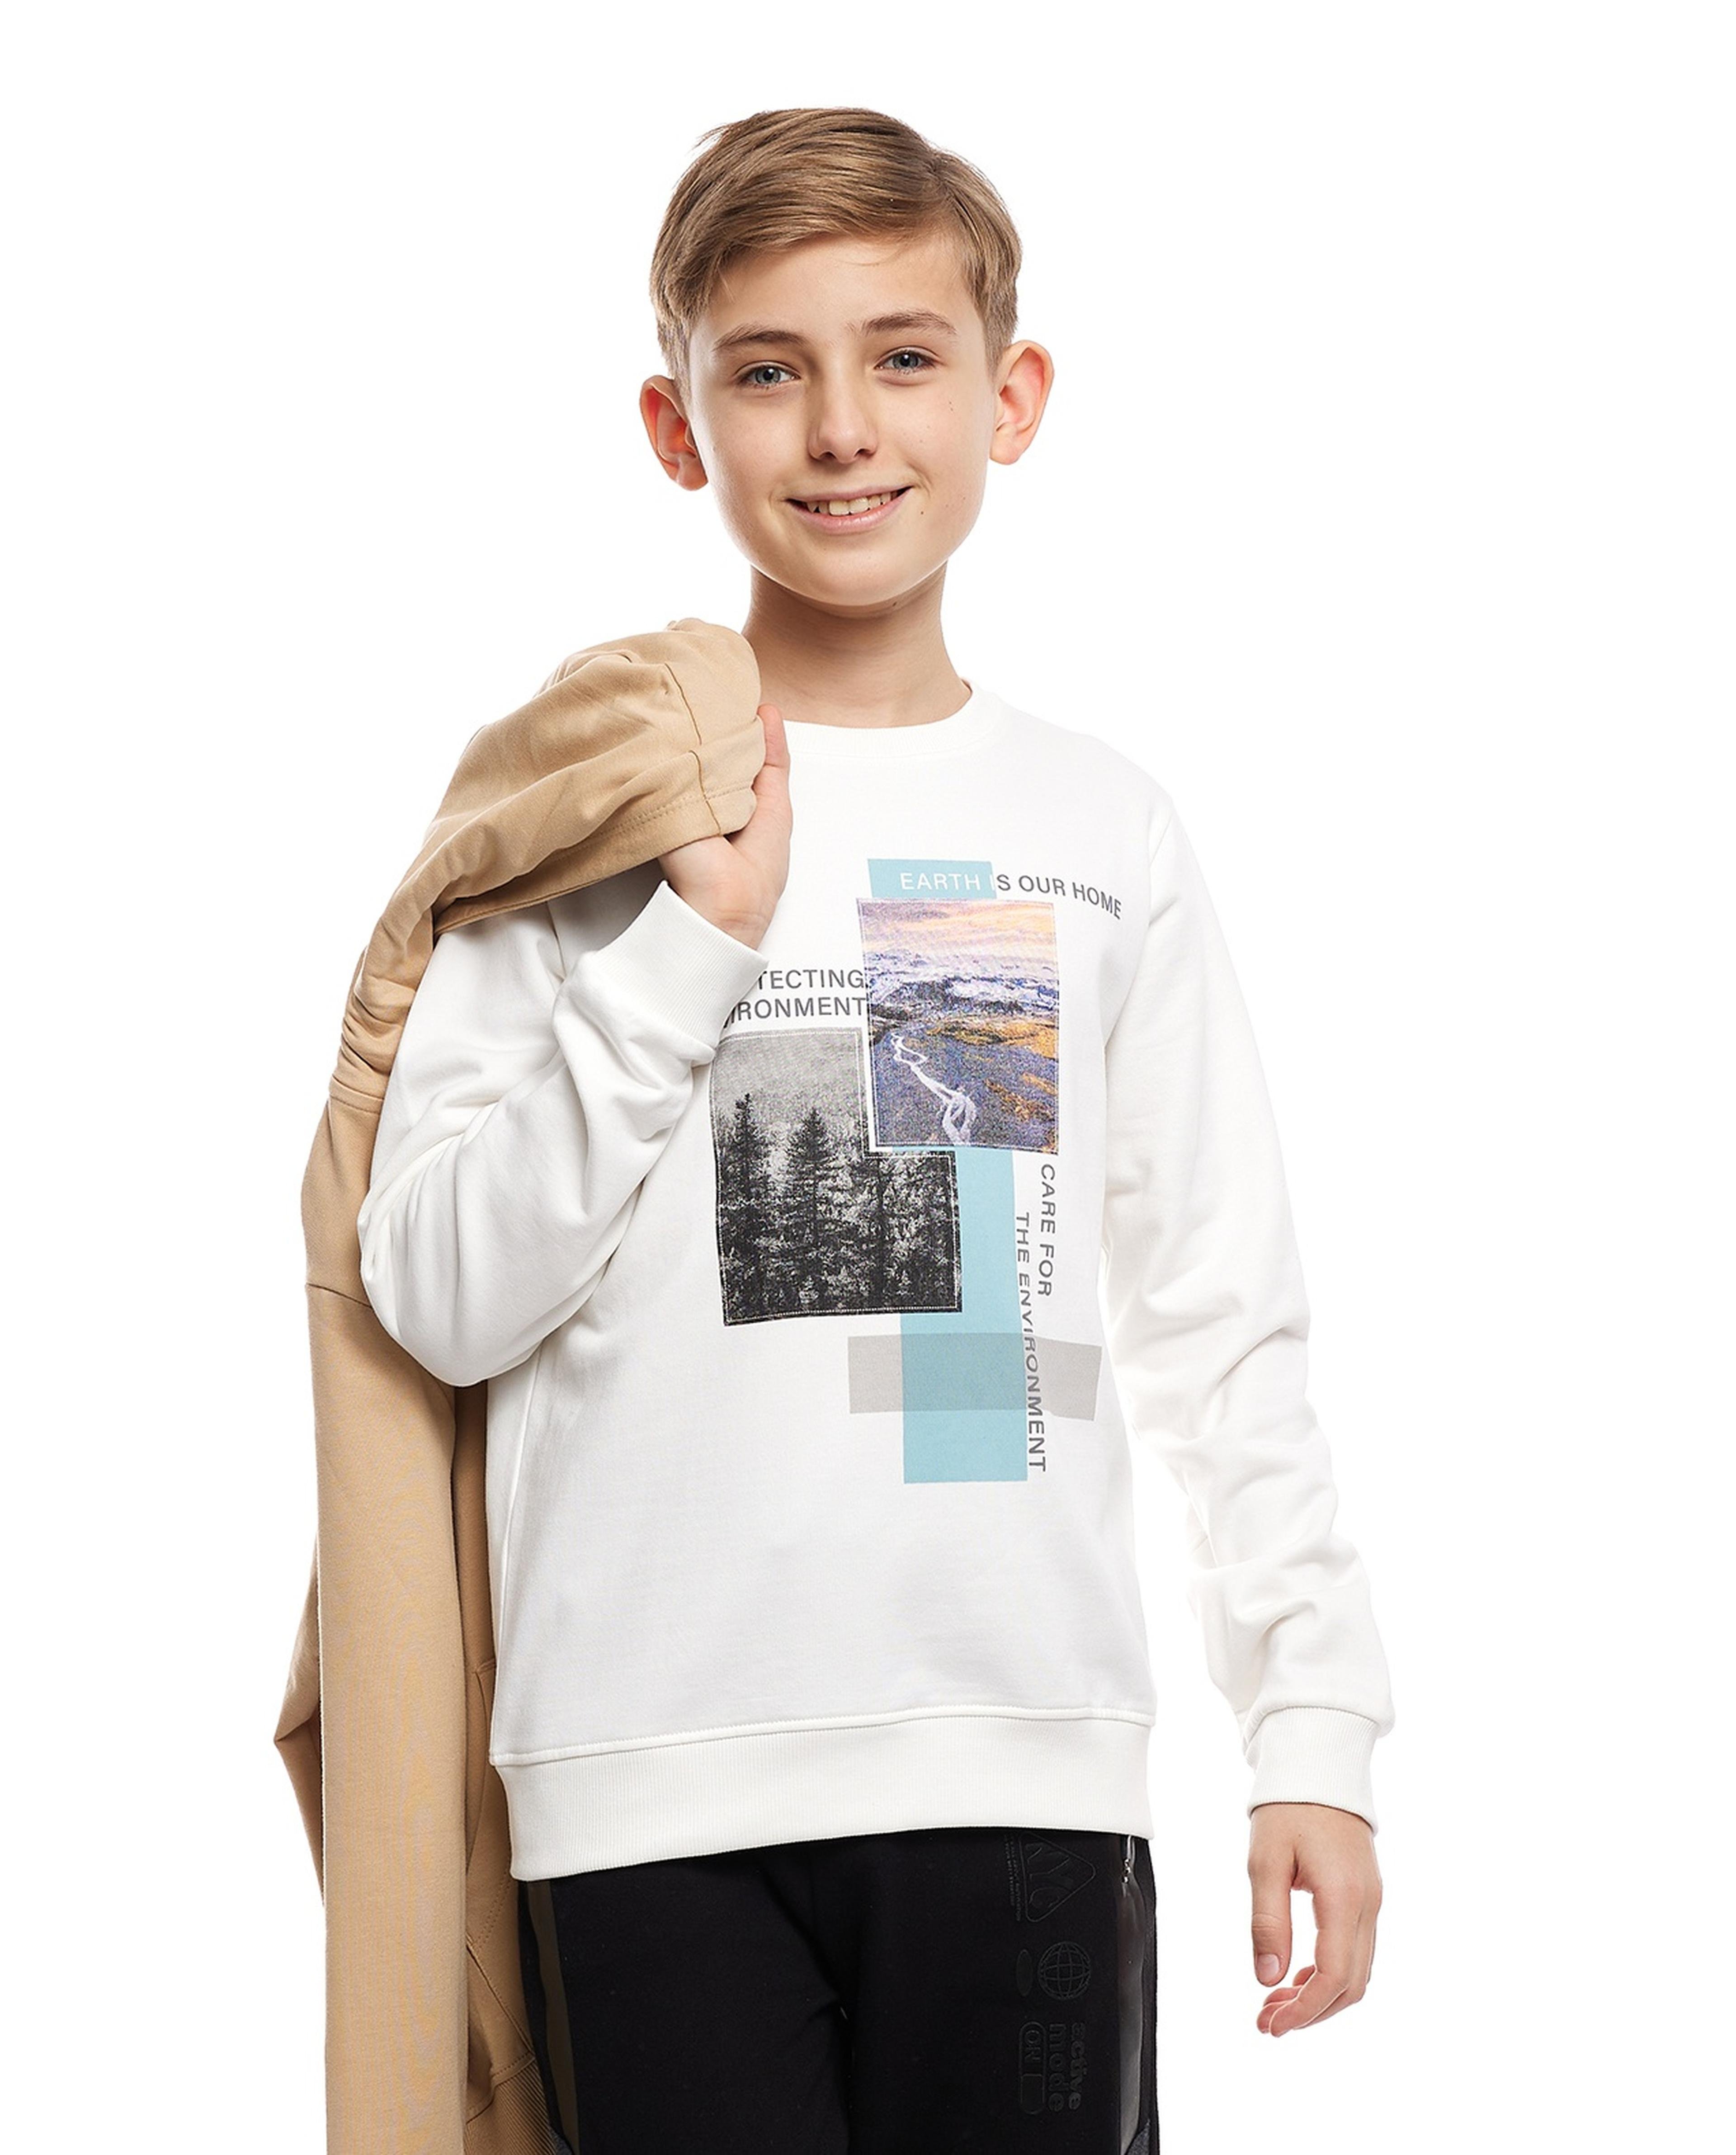 Graphic Print Sweatshirt with Crew Neck and Long Sleeves